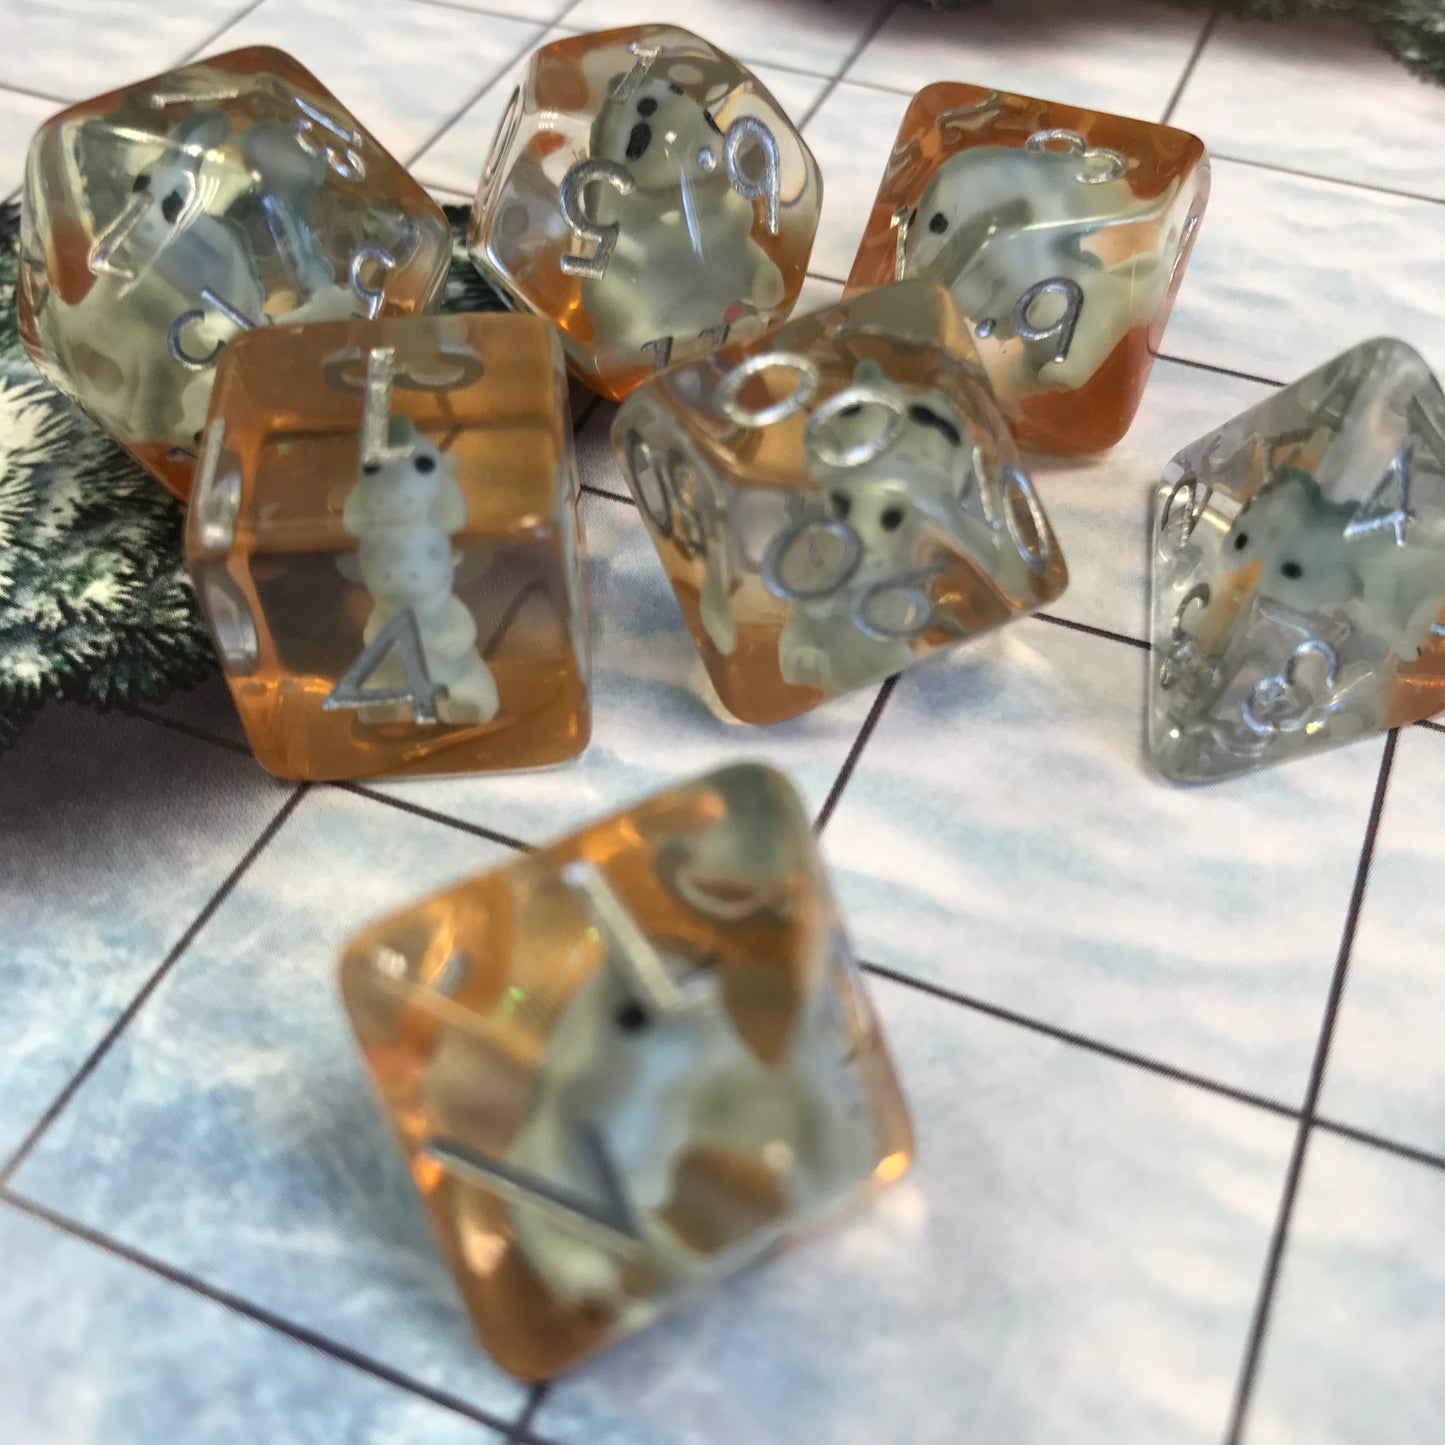 Dinosaur TTRPG/DND dice set for role playing games and dice goblins from a UK dice store